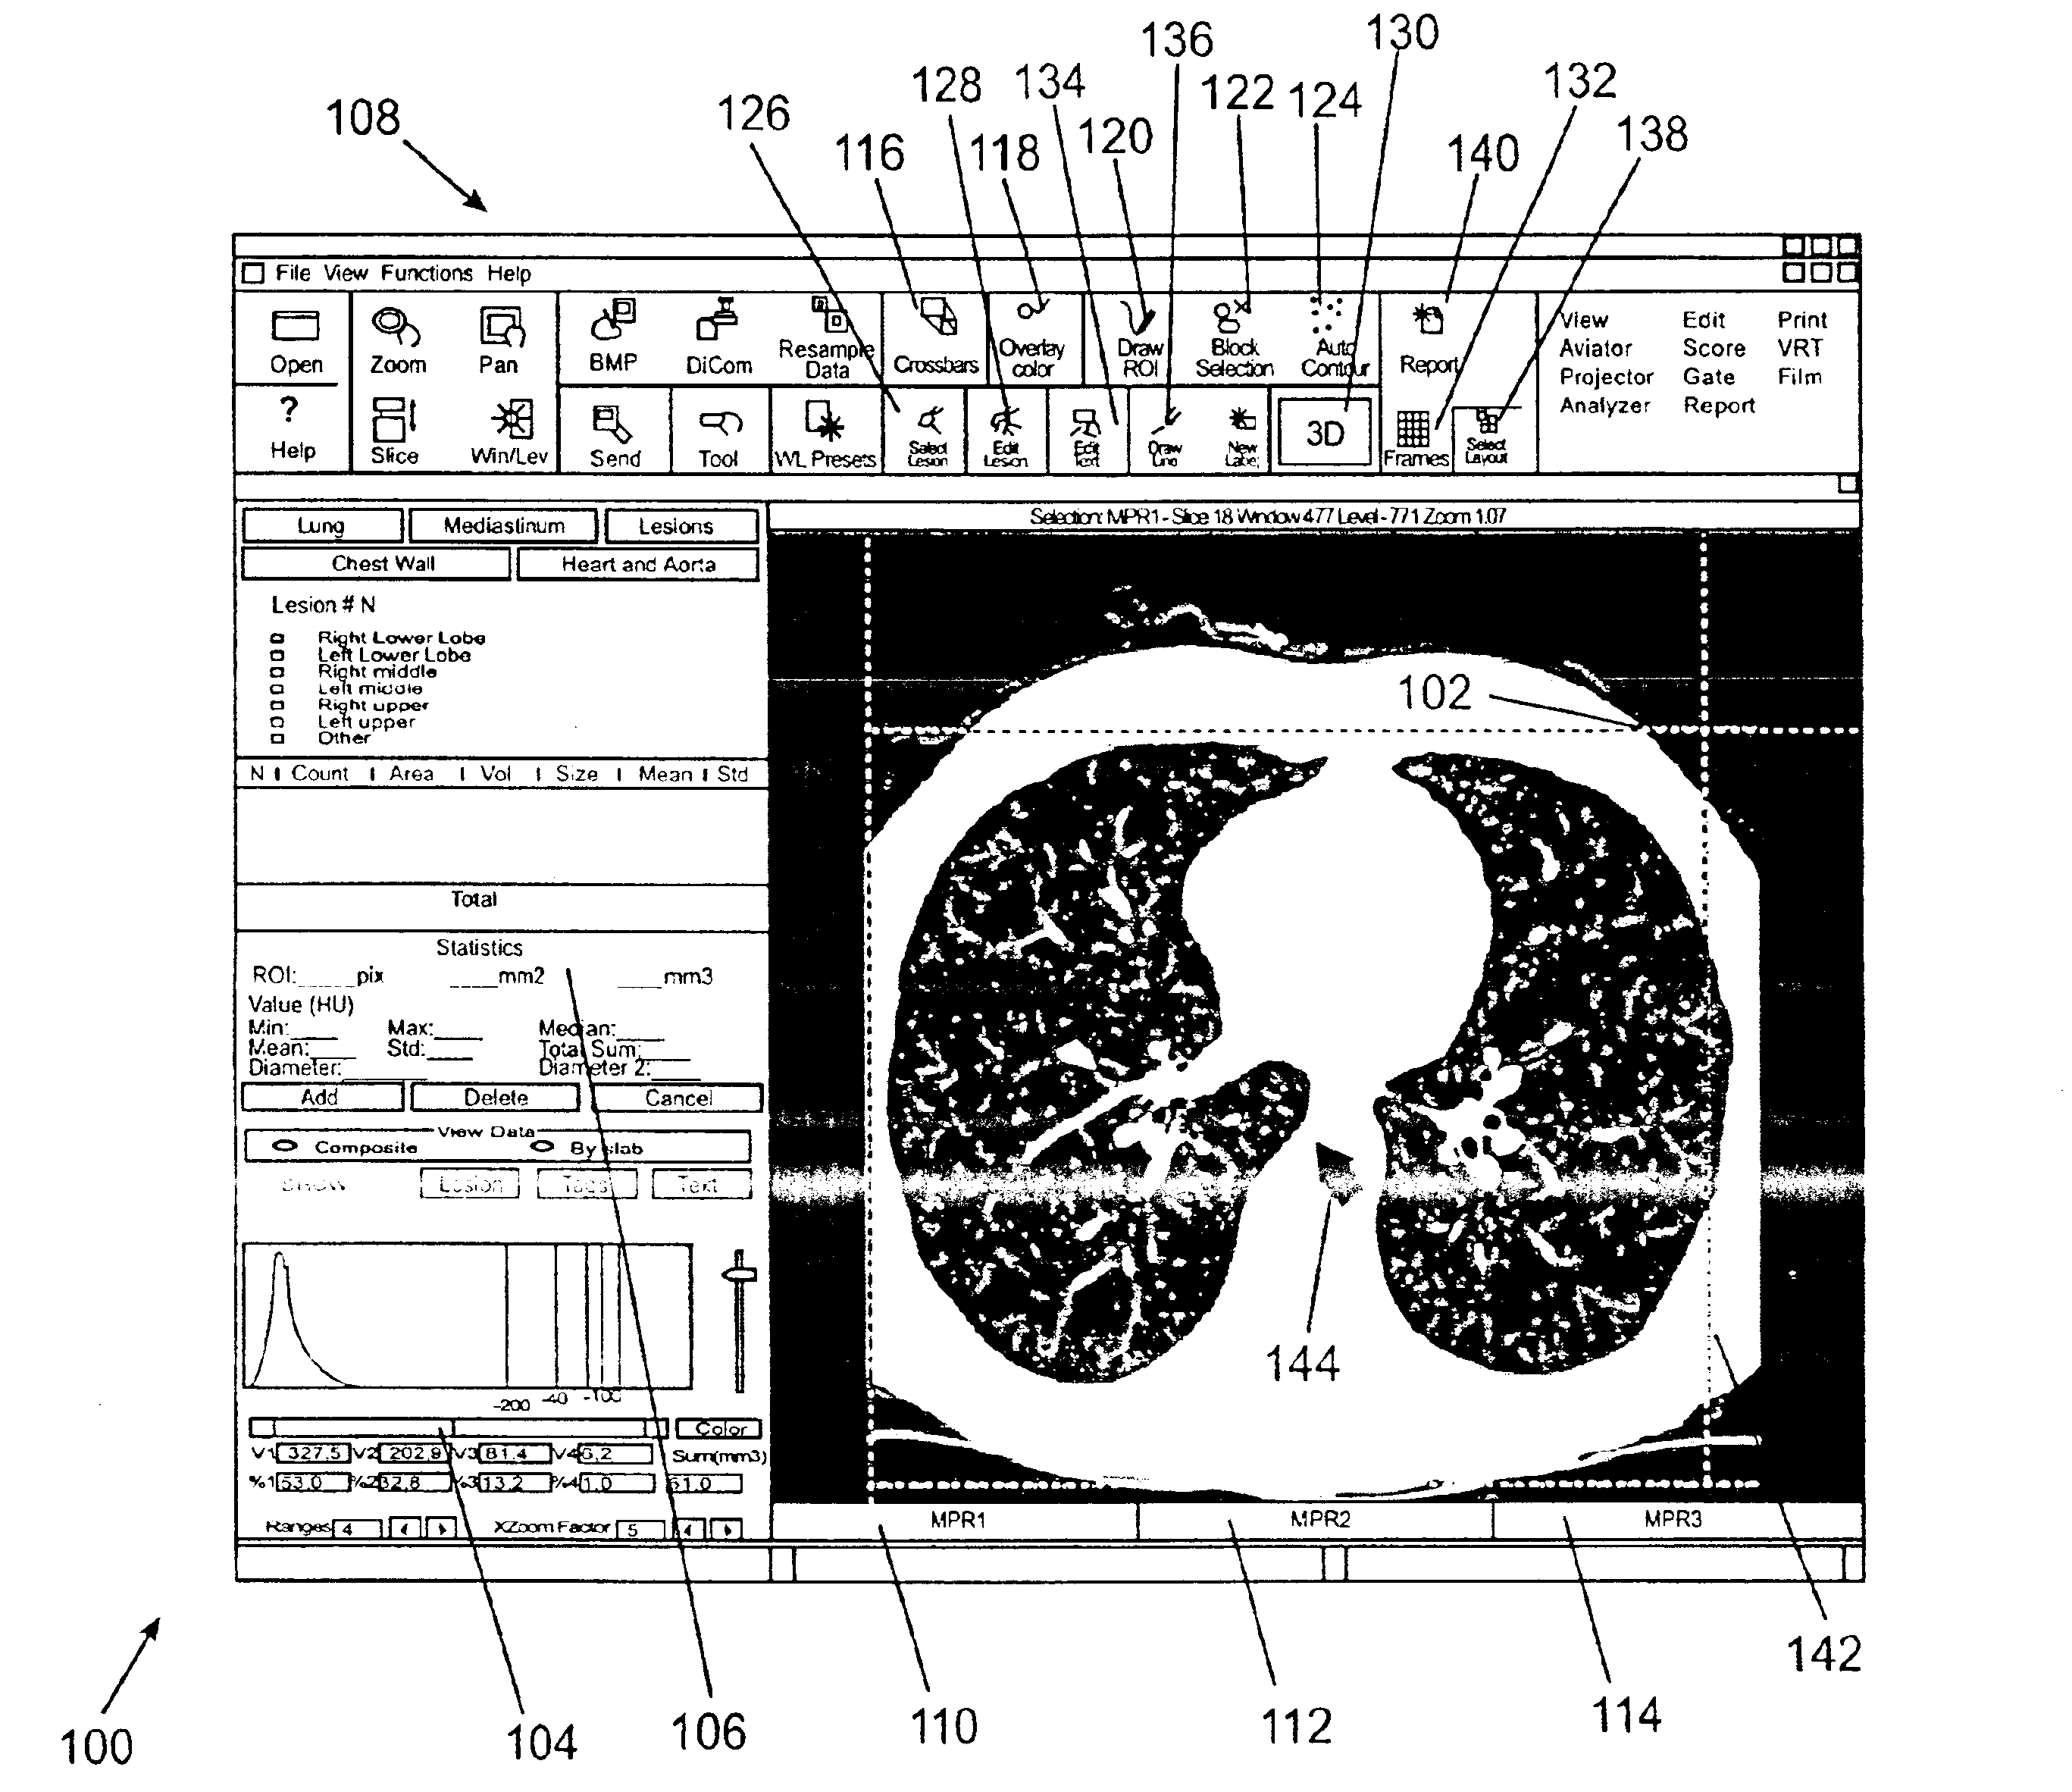 Methods for generating a lung report